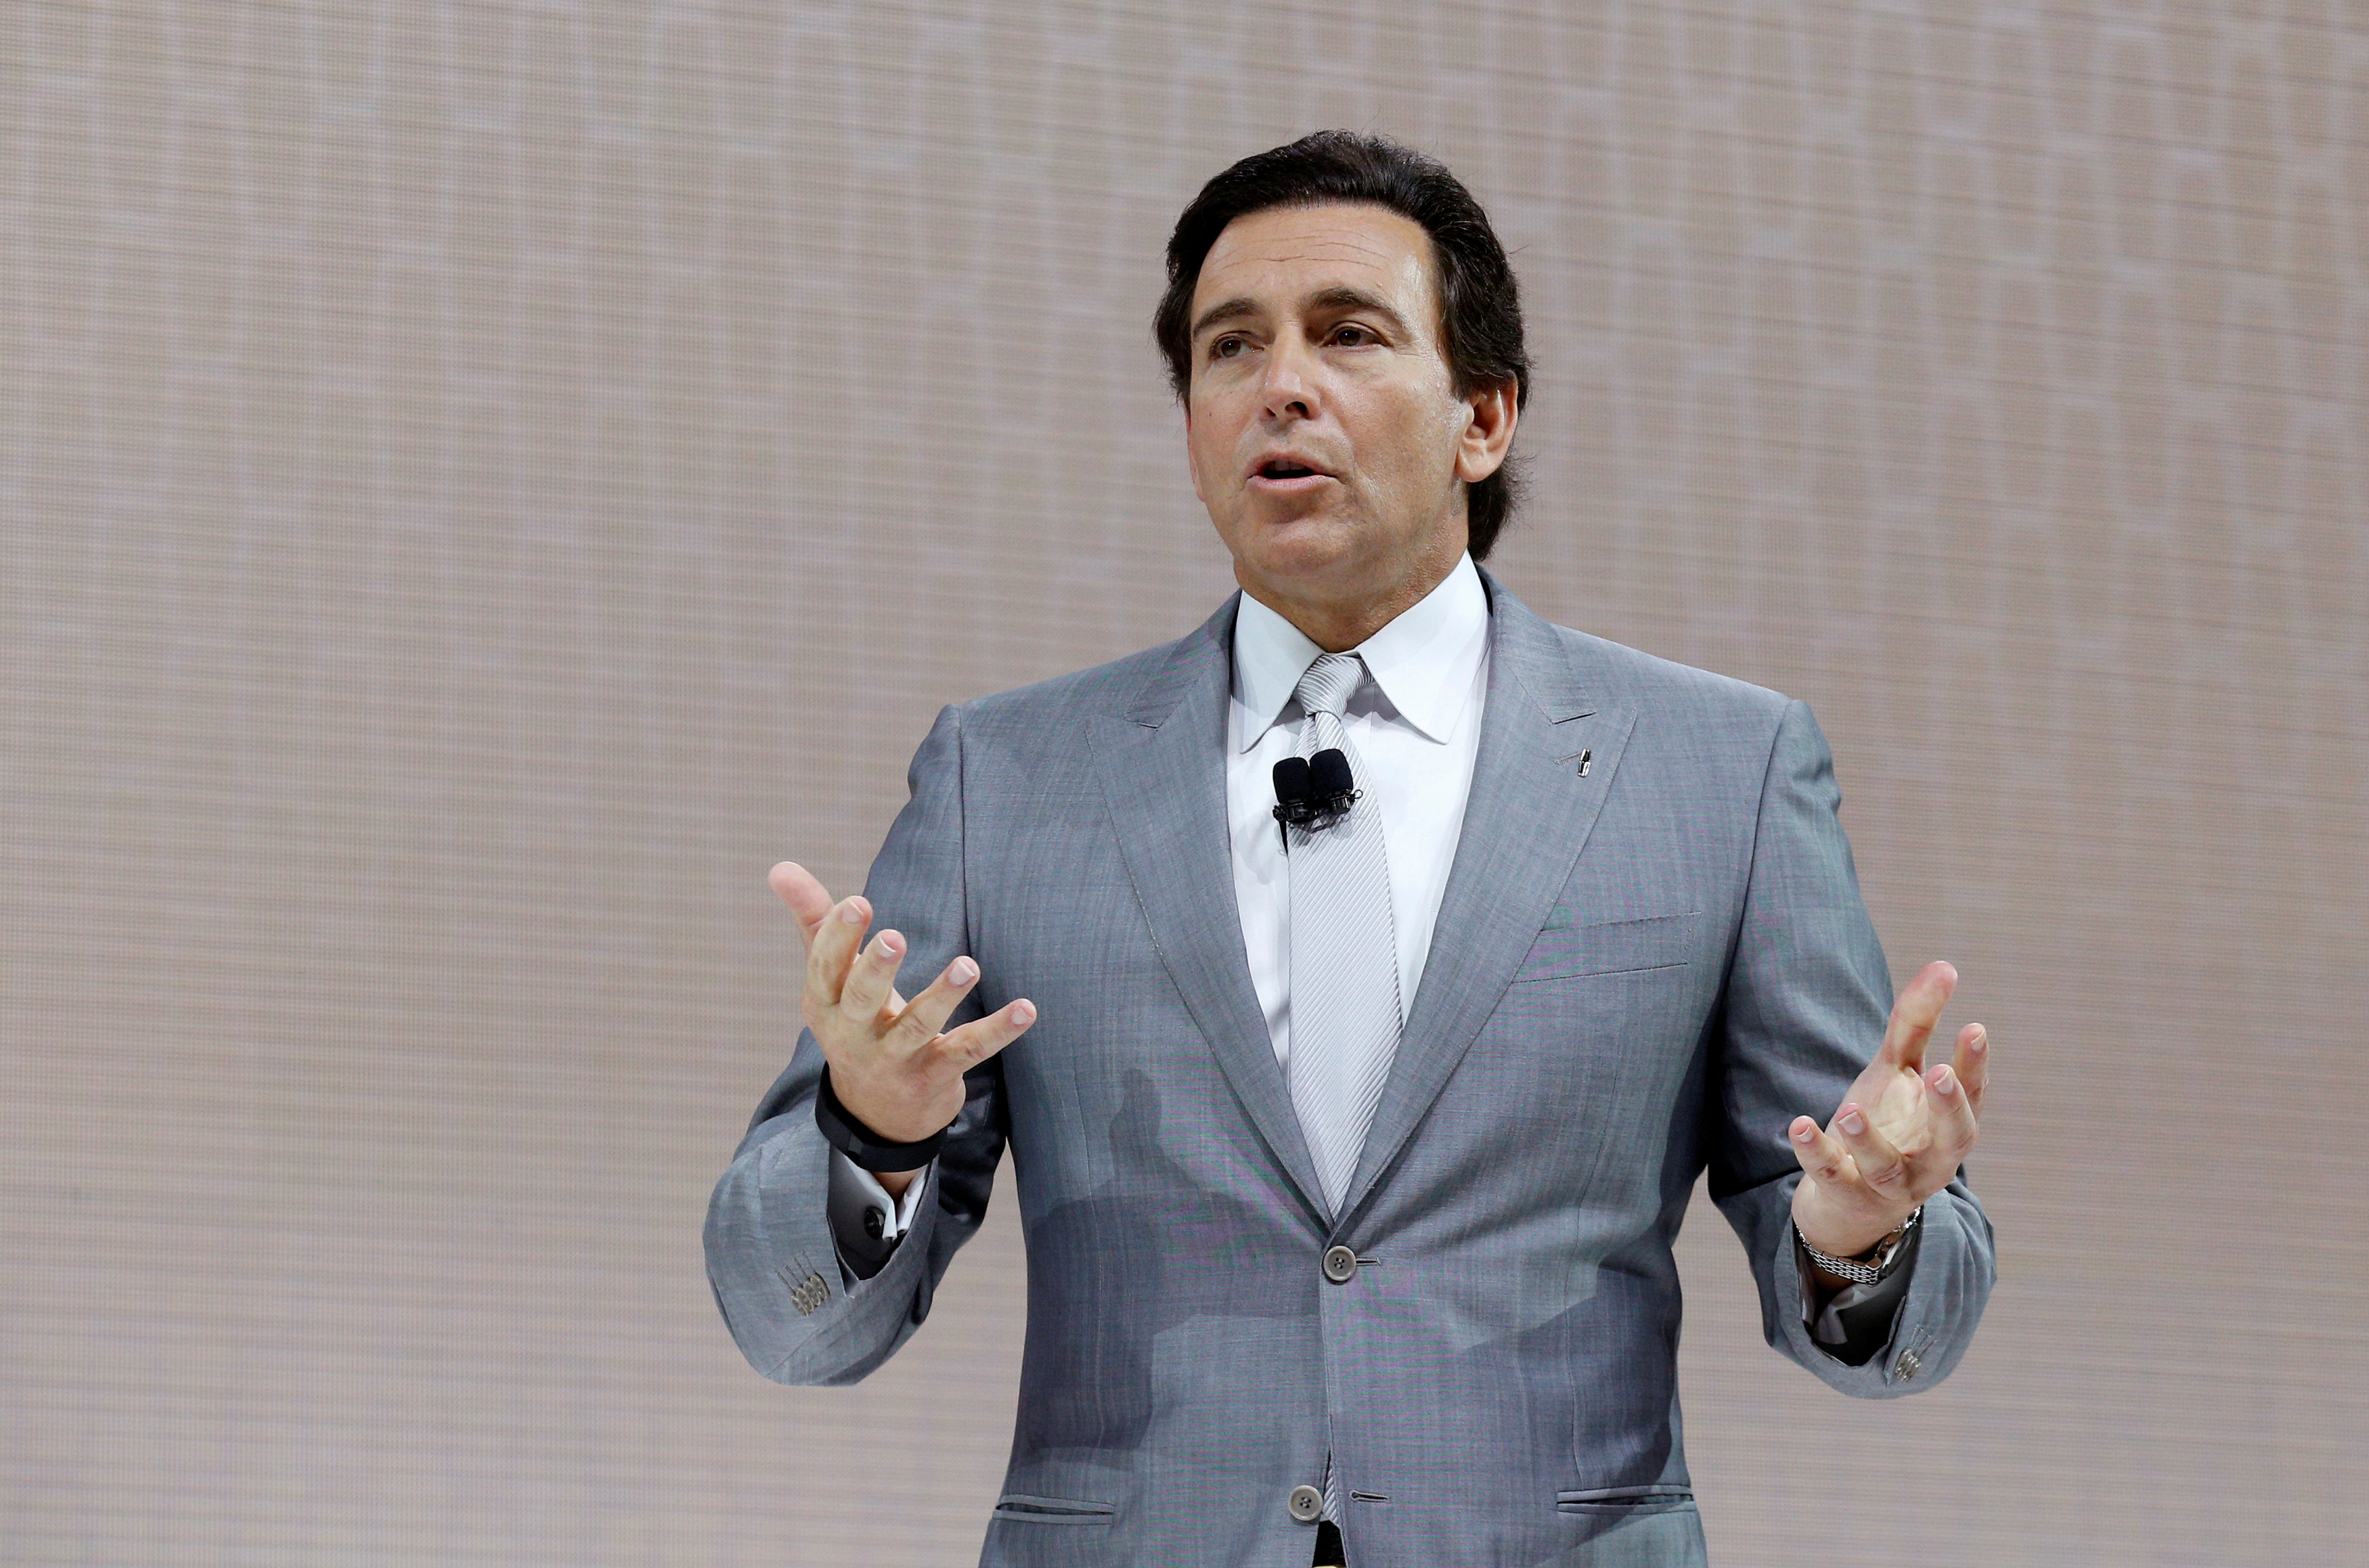 Ford fires chief executive Mark Fields, Hackett takes reins